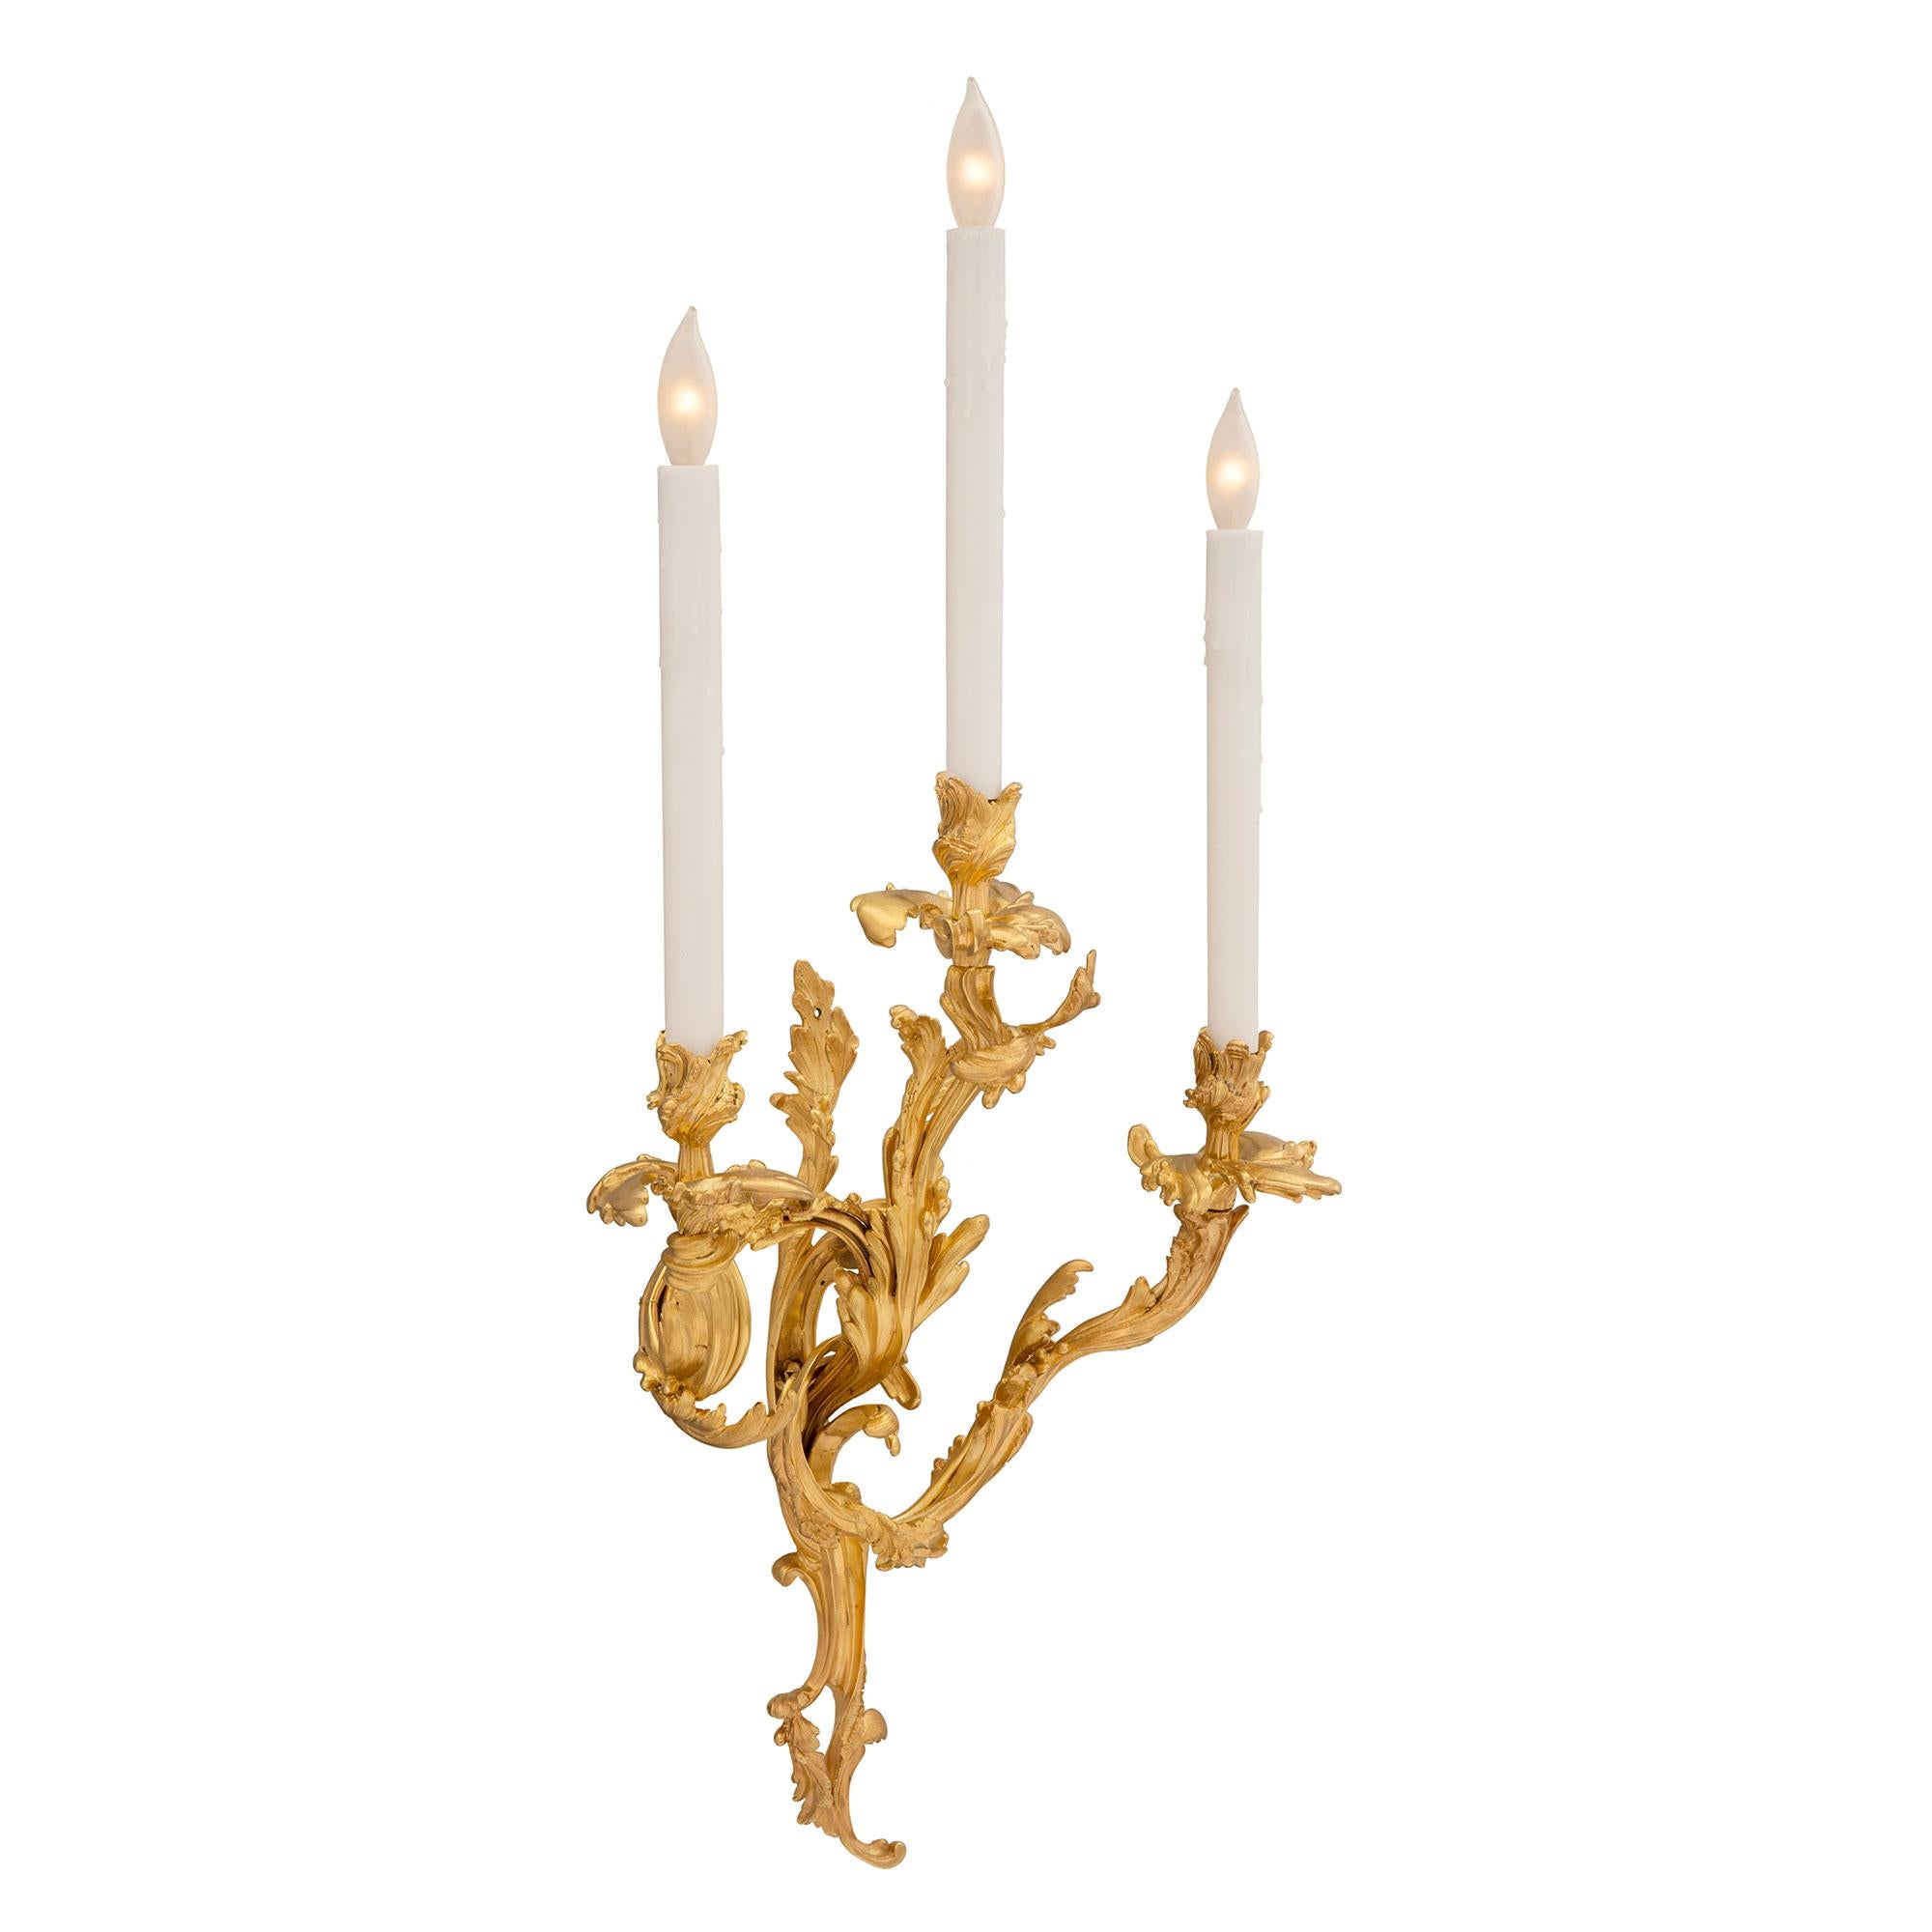 Pair of French Mid 19th Century Louis XV St. Ormolu Sconces In Good Condition For Sale In West Palm Beach, FL